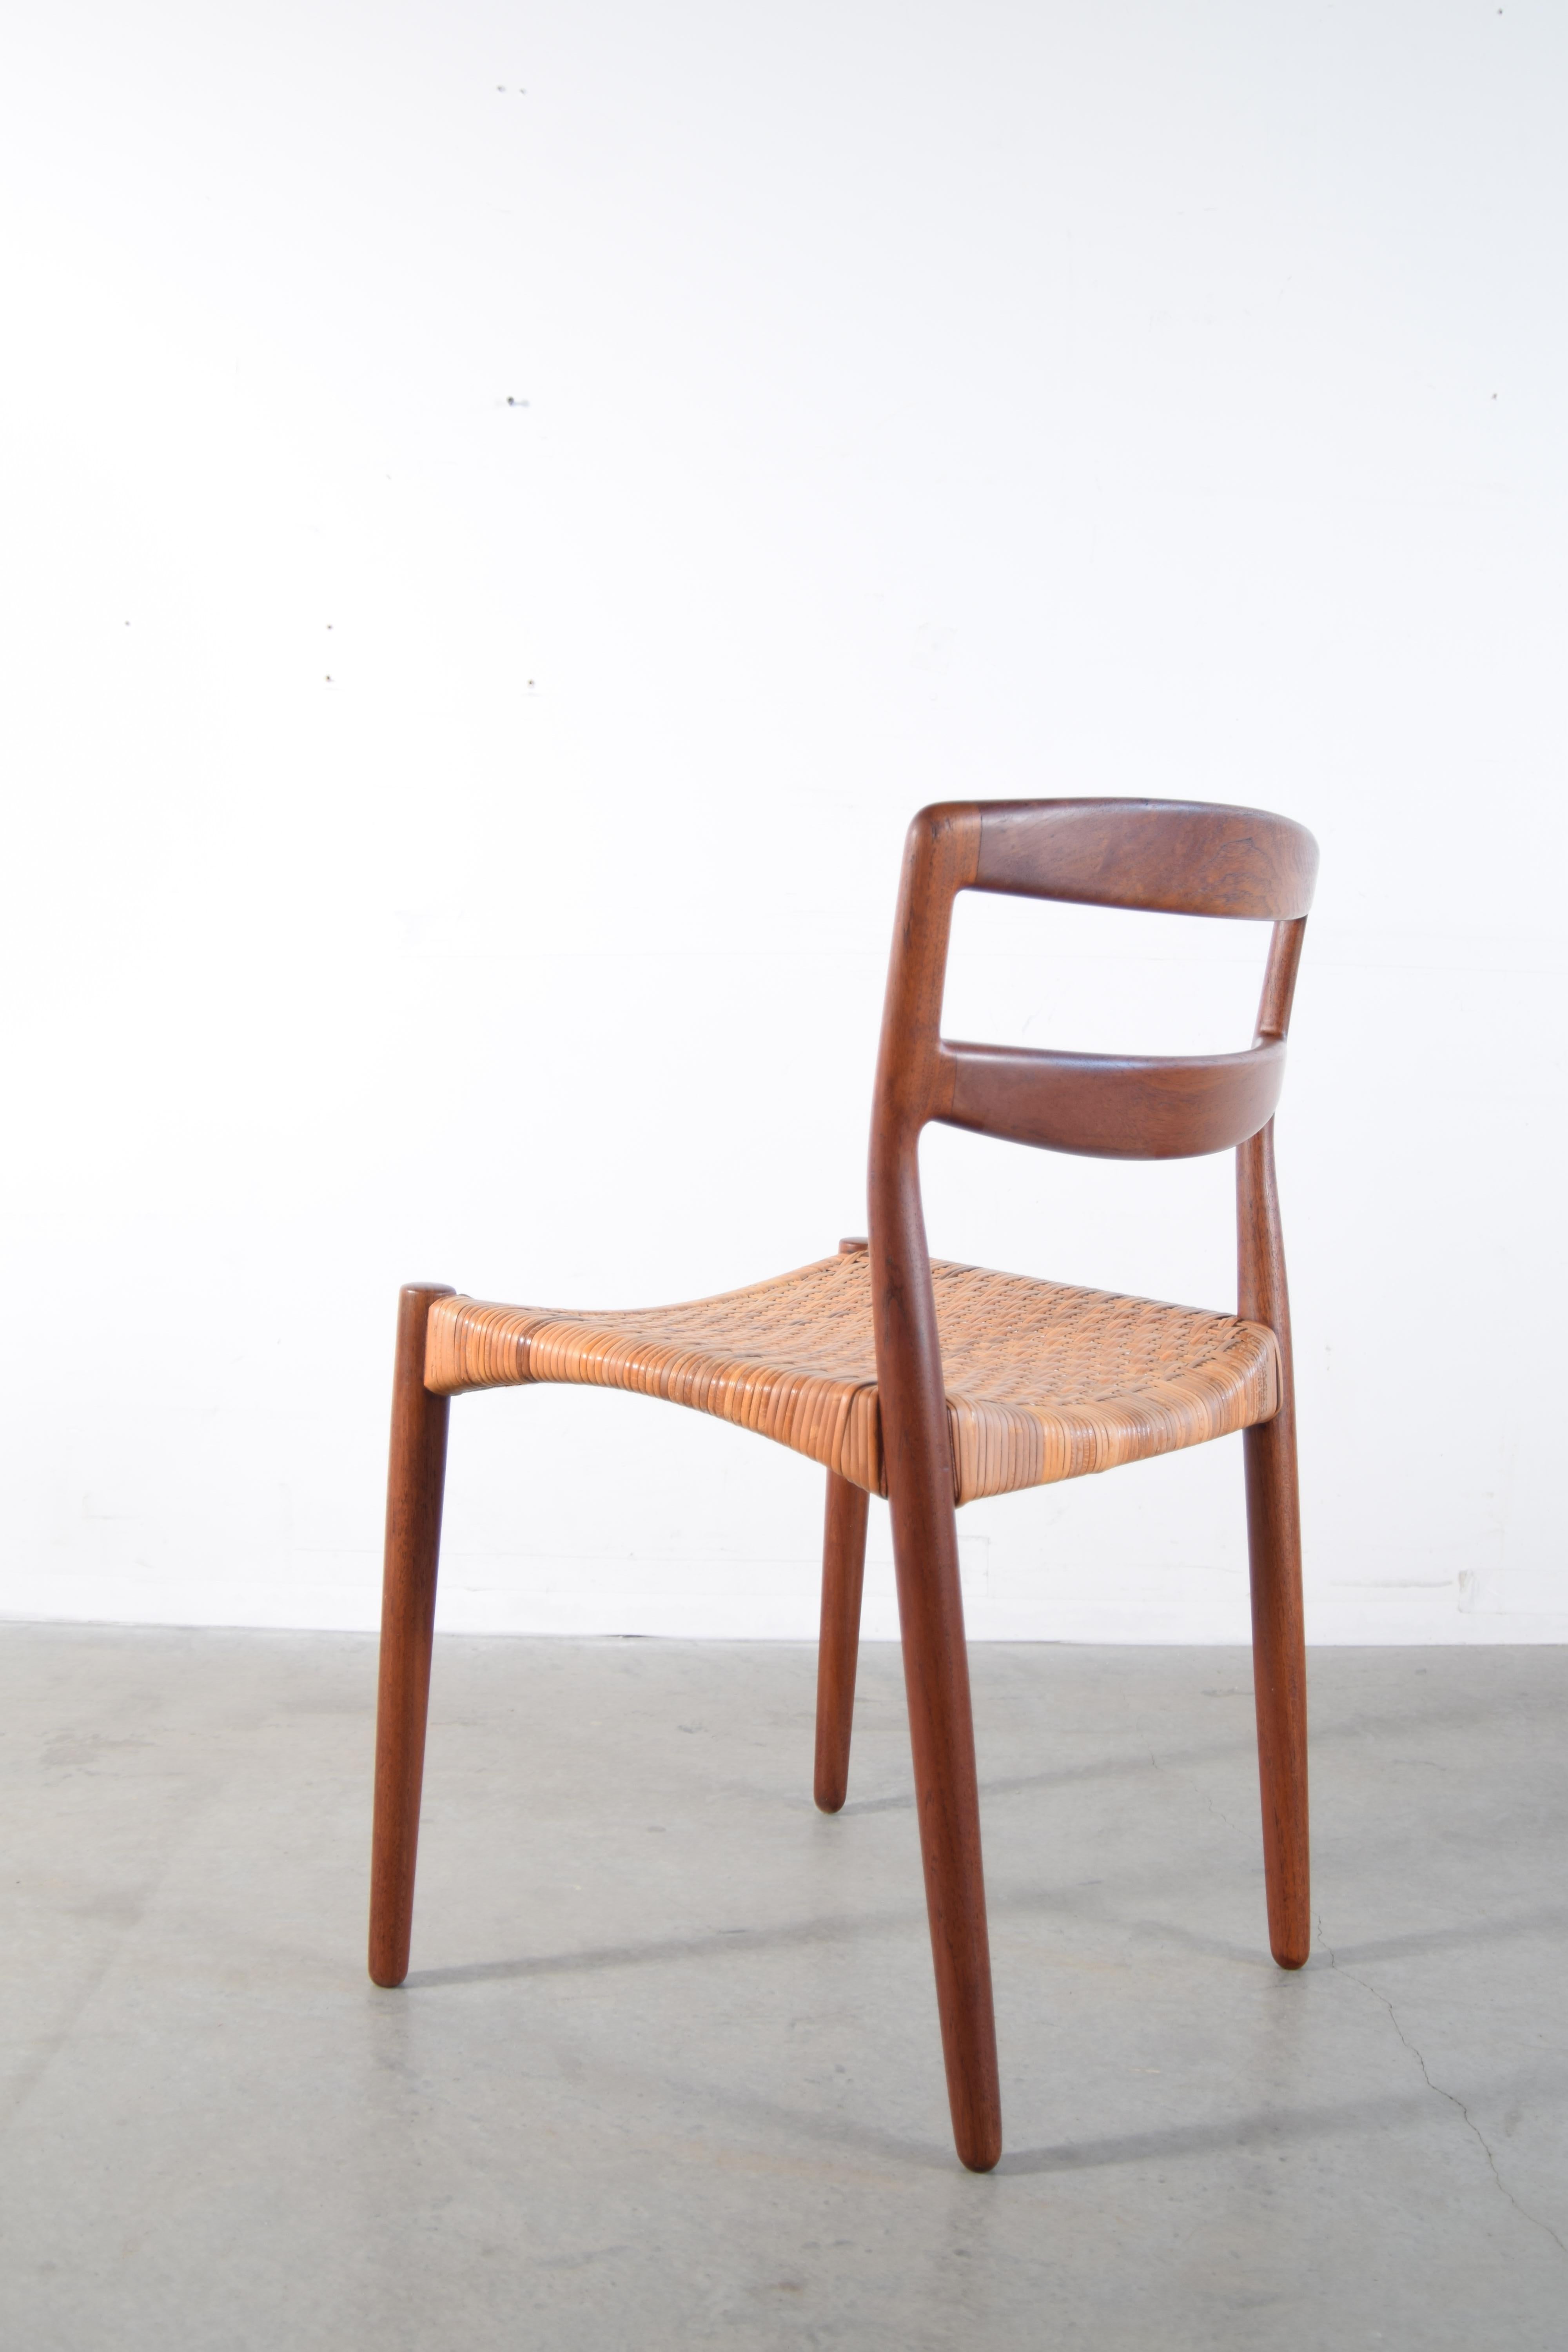 Pair of Ejner Larsen and Aksel Bender Madsen Teak and Cane Chairs For Sale 7